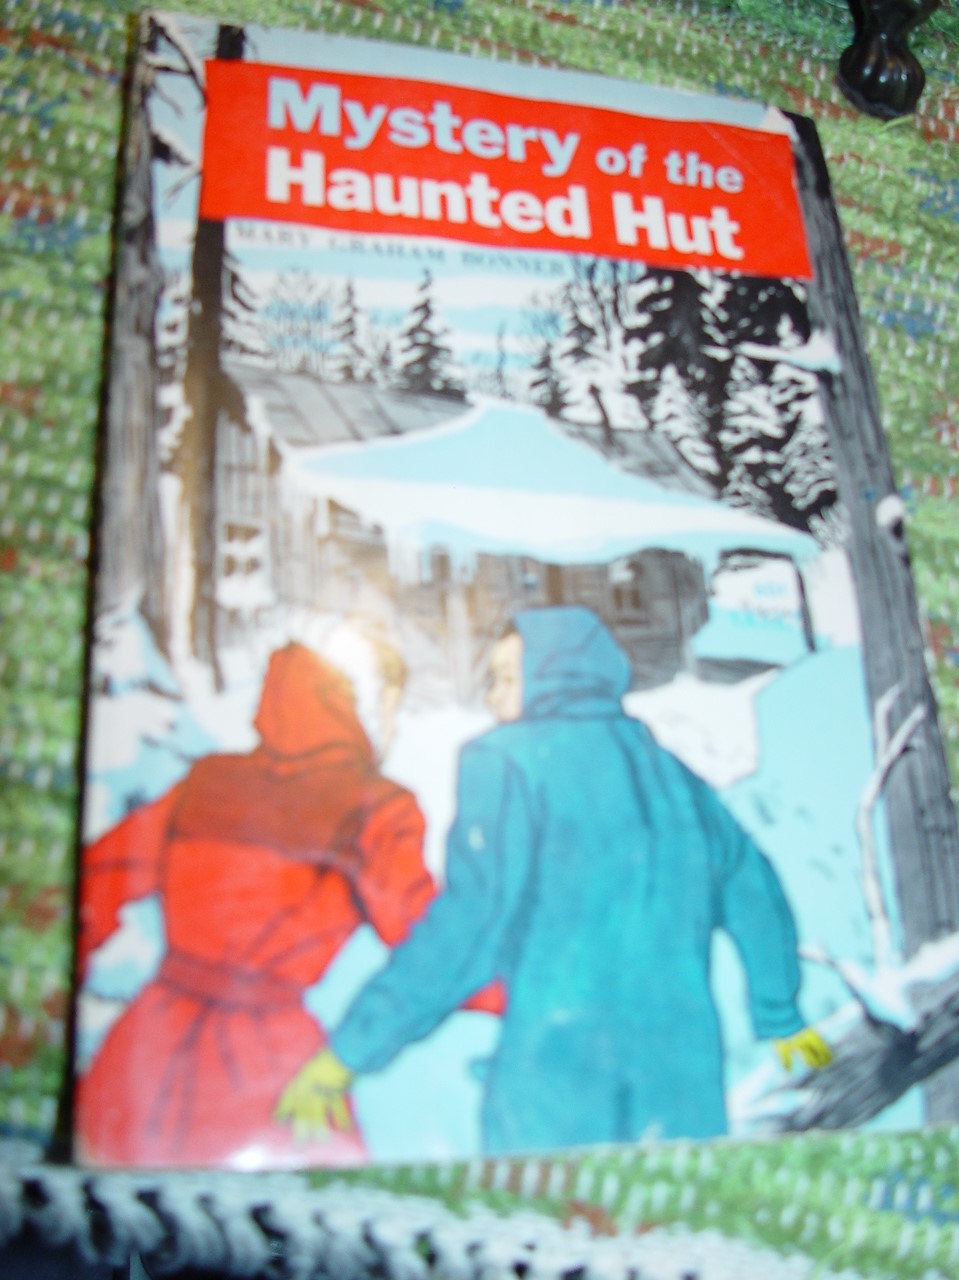 Mystery of the Haunted Hut 1969 by Mary
                        Graham Bonner